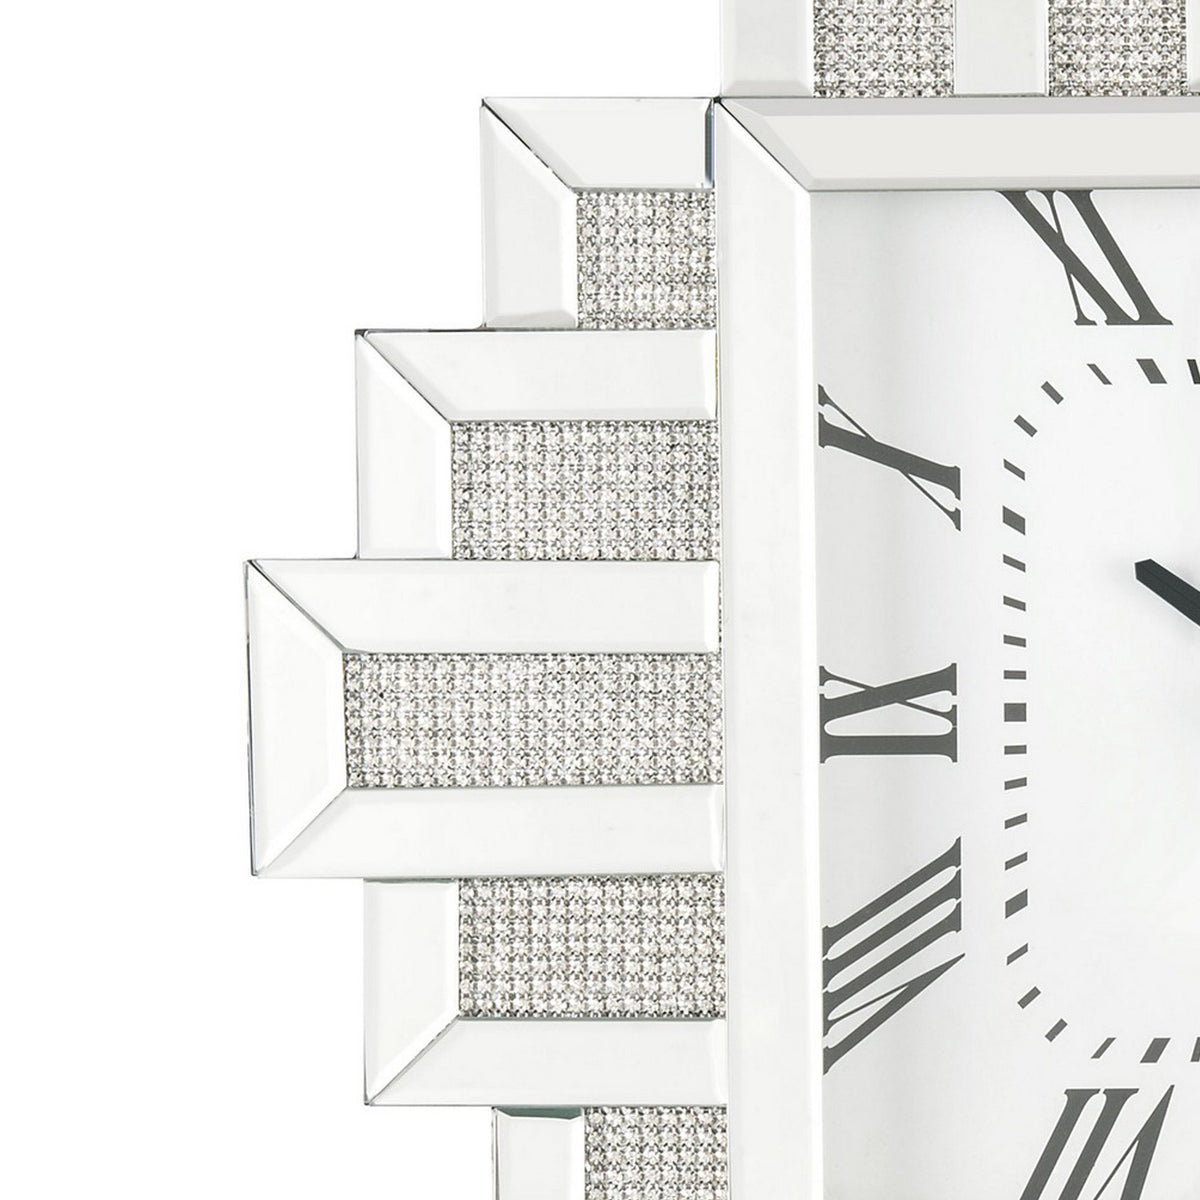 Irregular Mirror Frame Wall Clock with Crushed Faux Diamond Inlay, Silver - BM225870